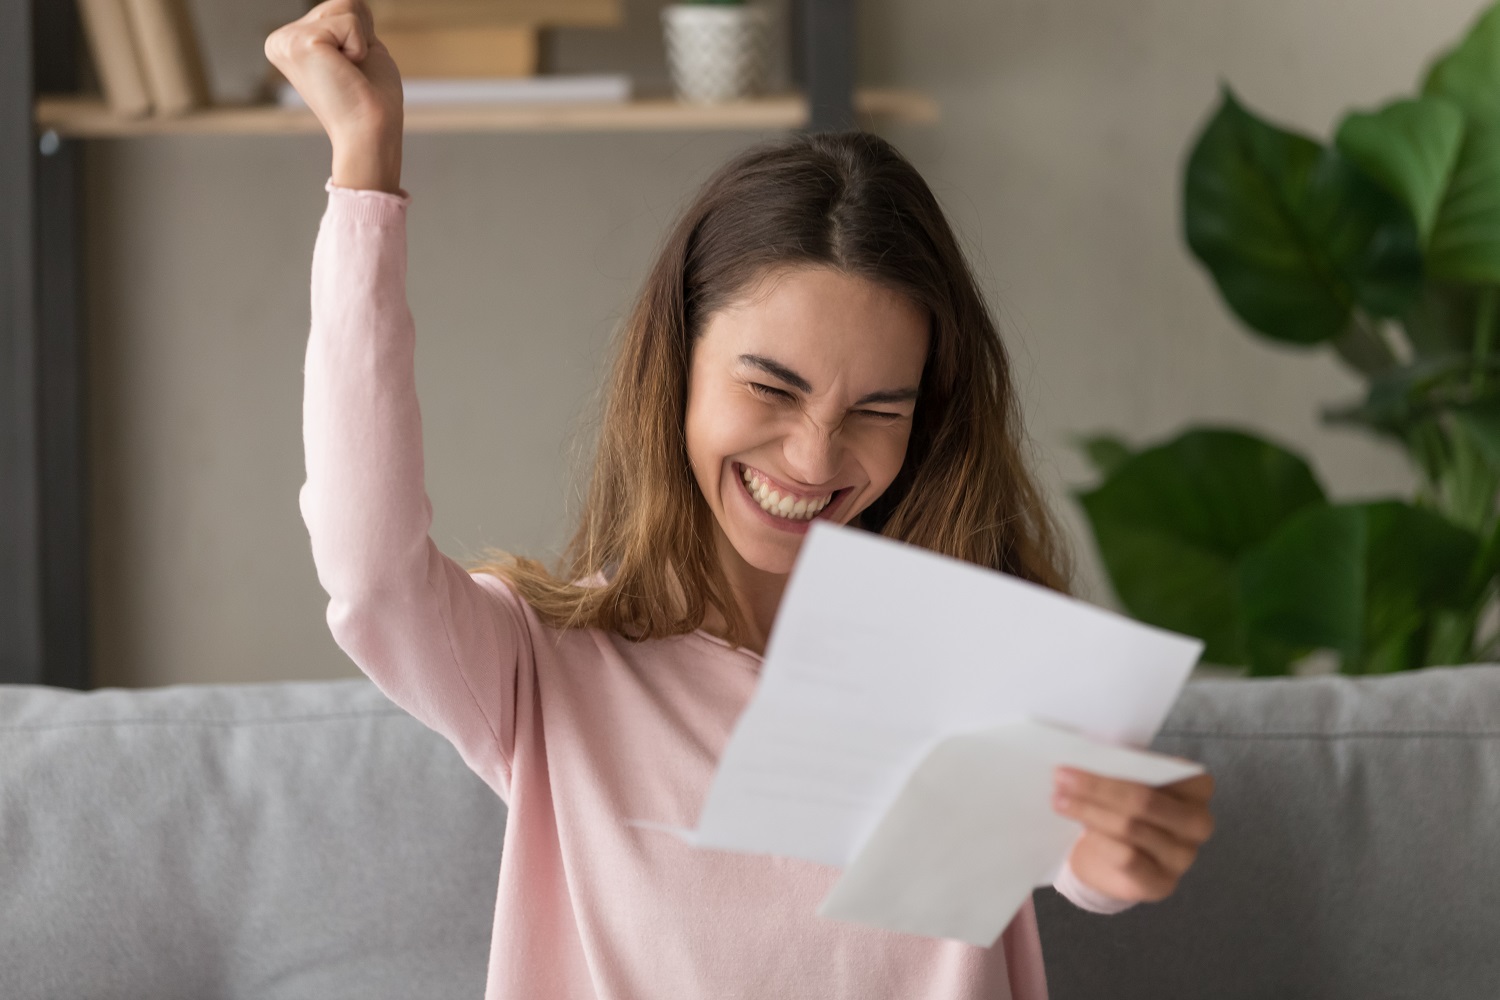 a woman celebrating news that she received in the mail